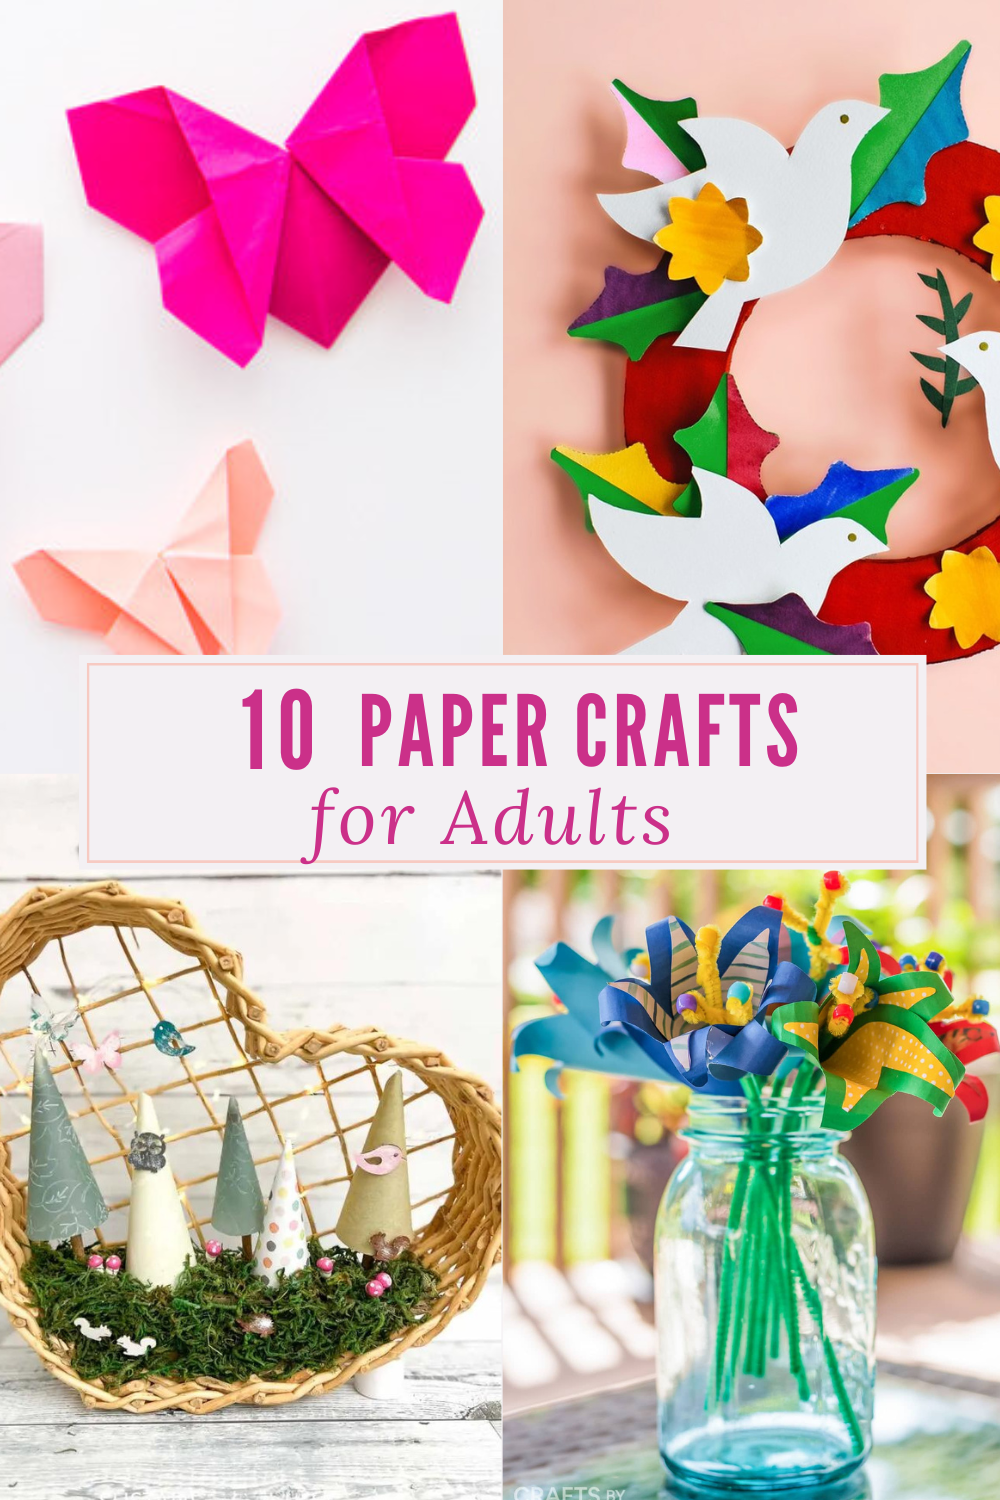 Fun Crafts to Make Out of Paper